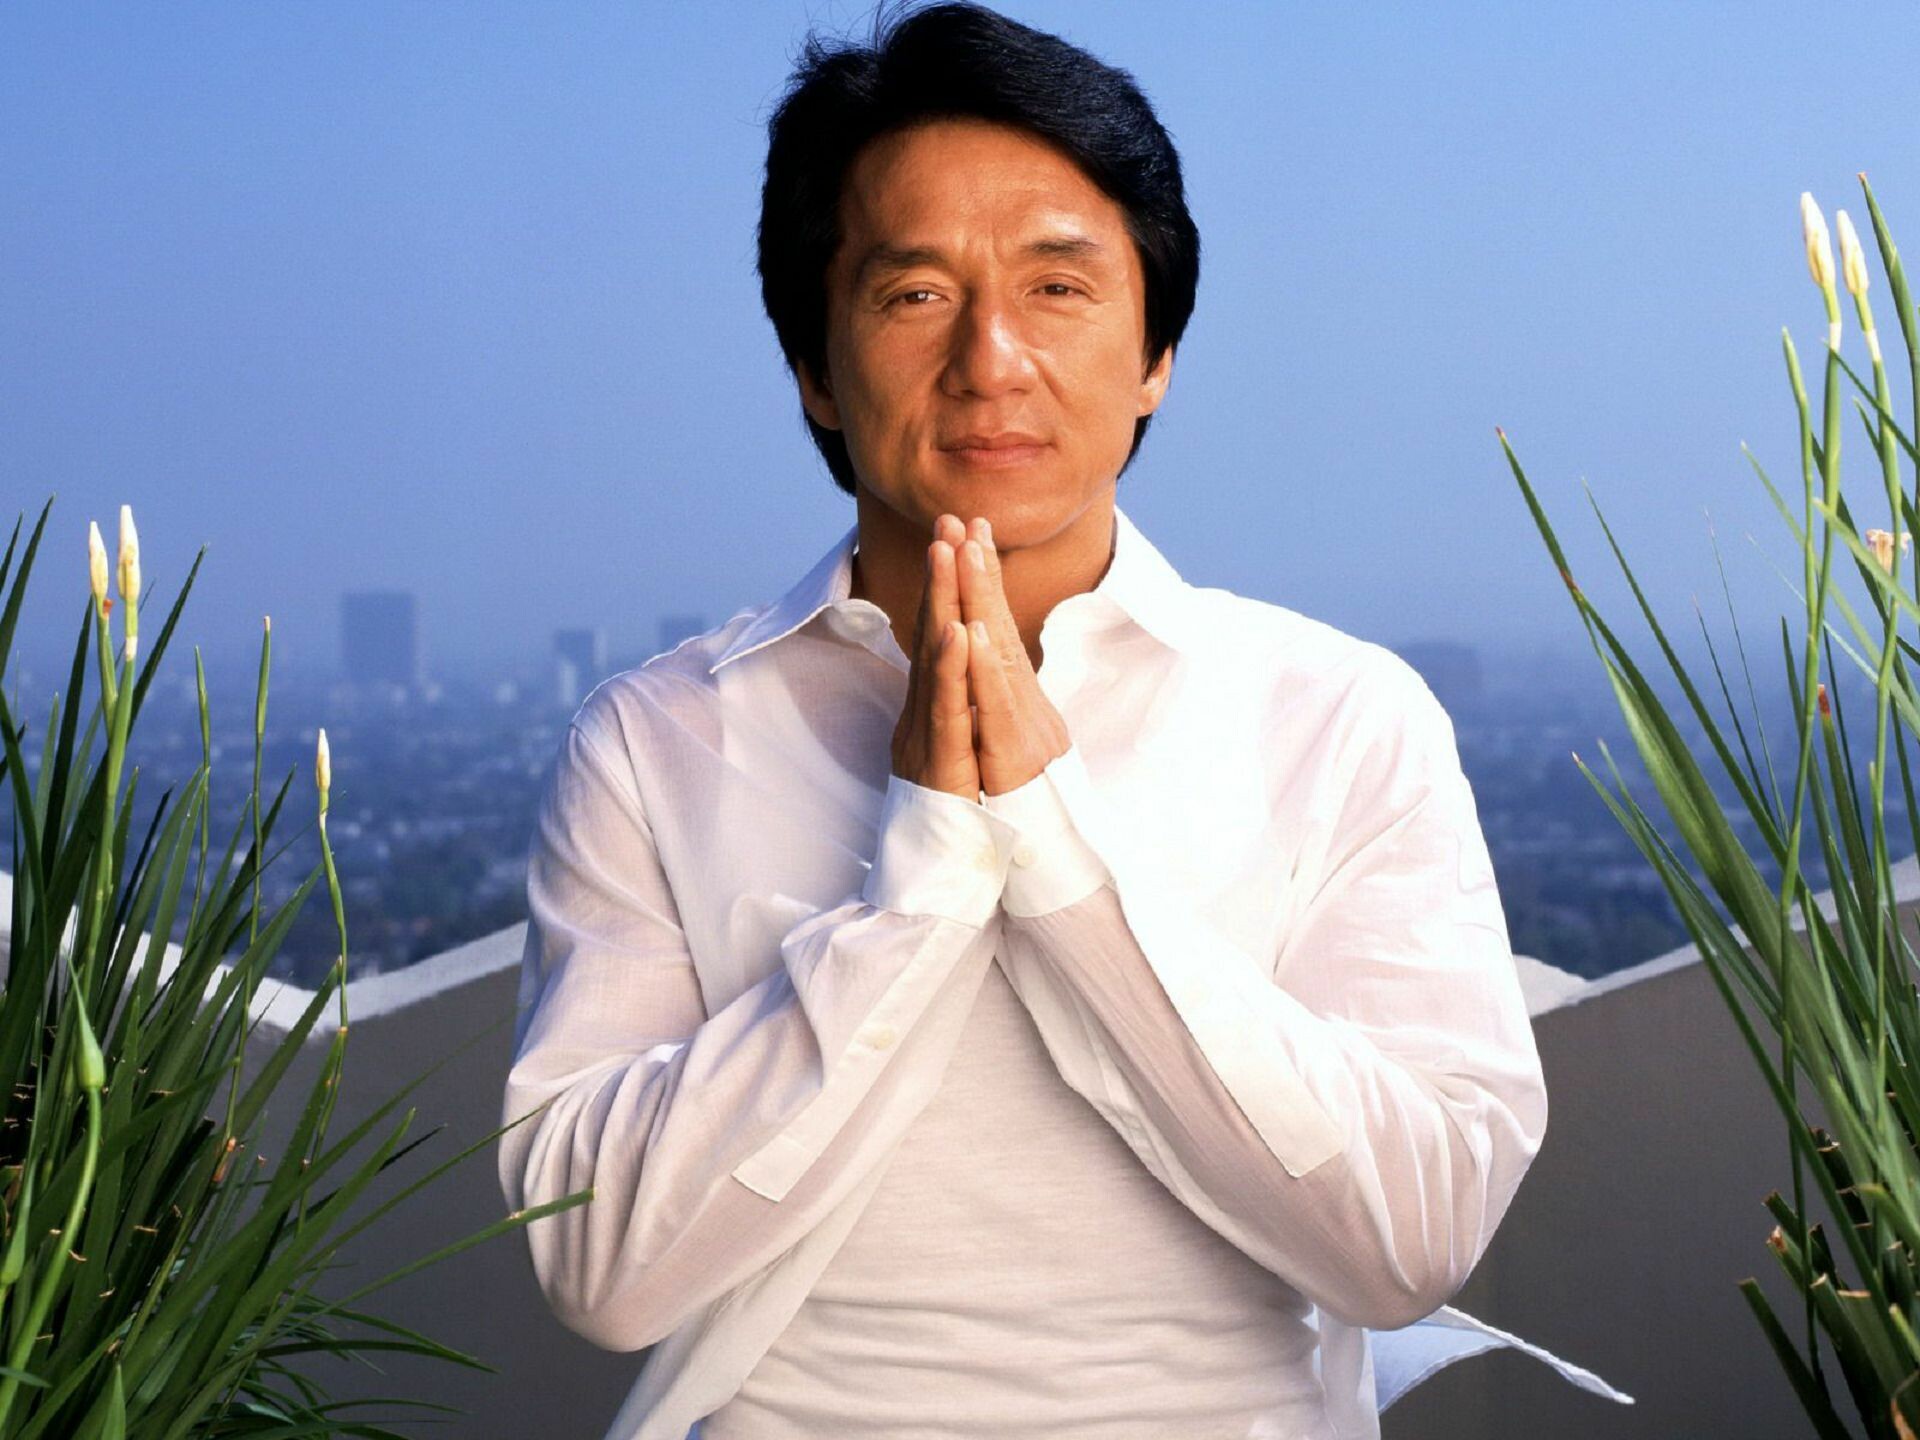 Jackie Chan, Collection of wallpapers, Iconic images, Action movie star, 1920x1440 HD Desktop